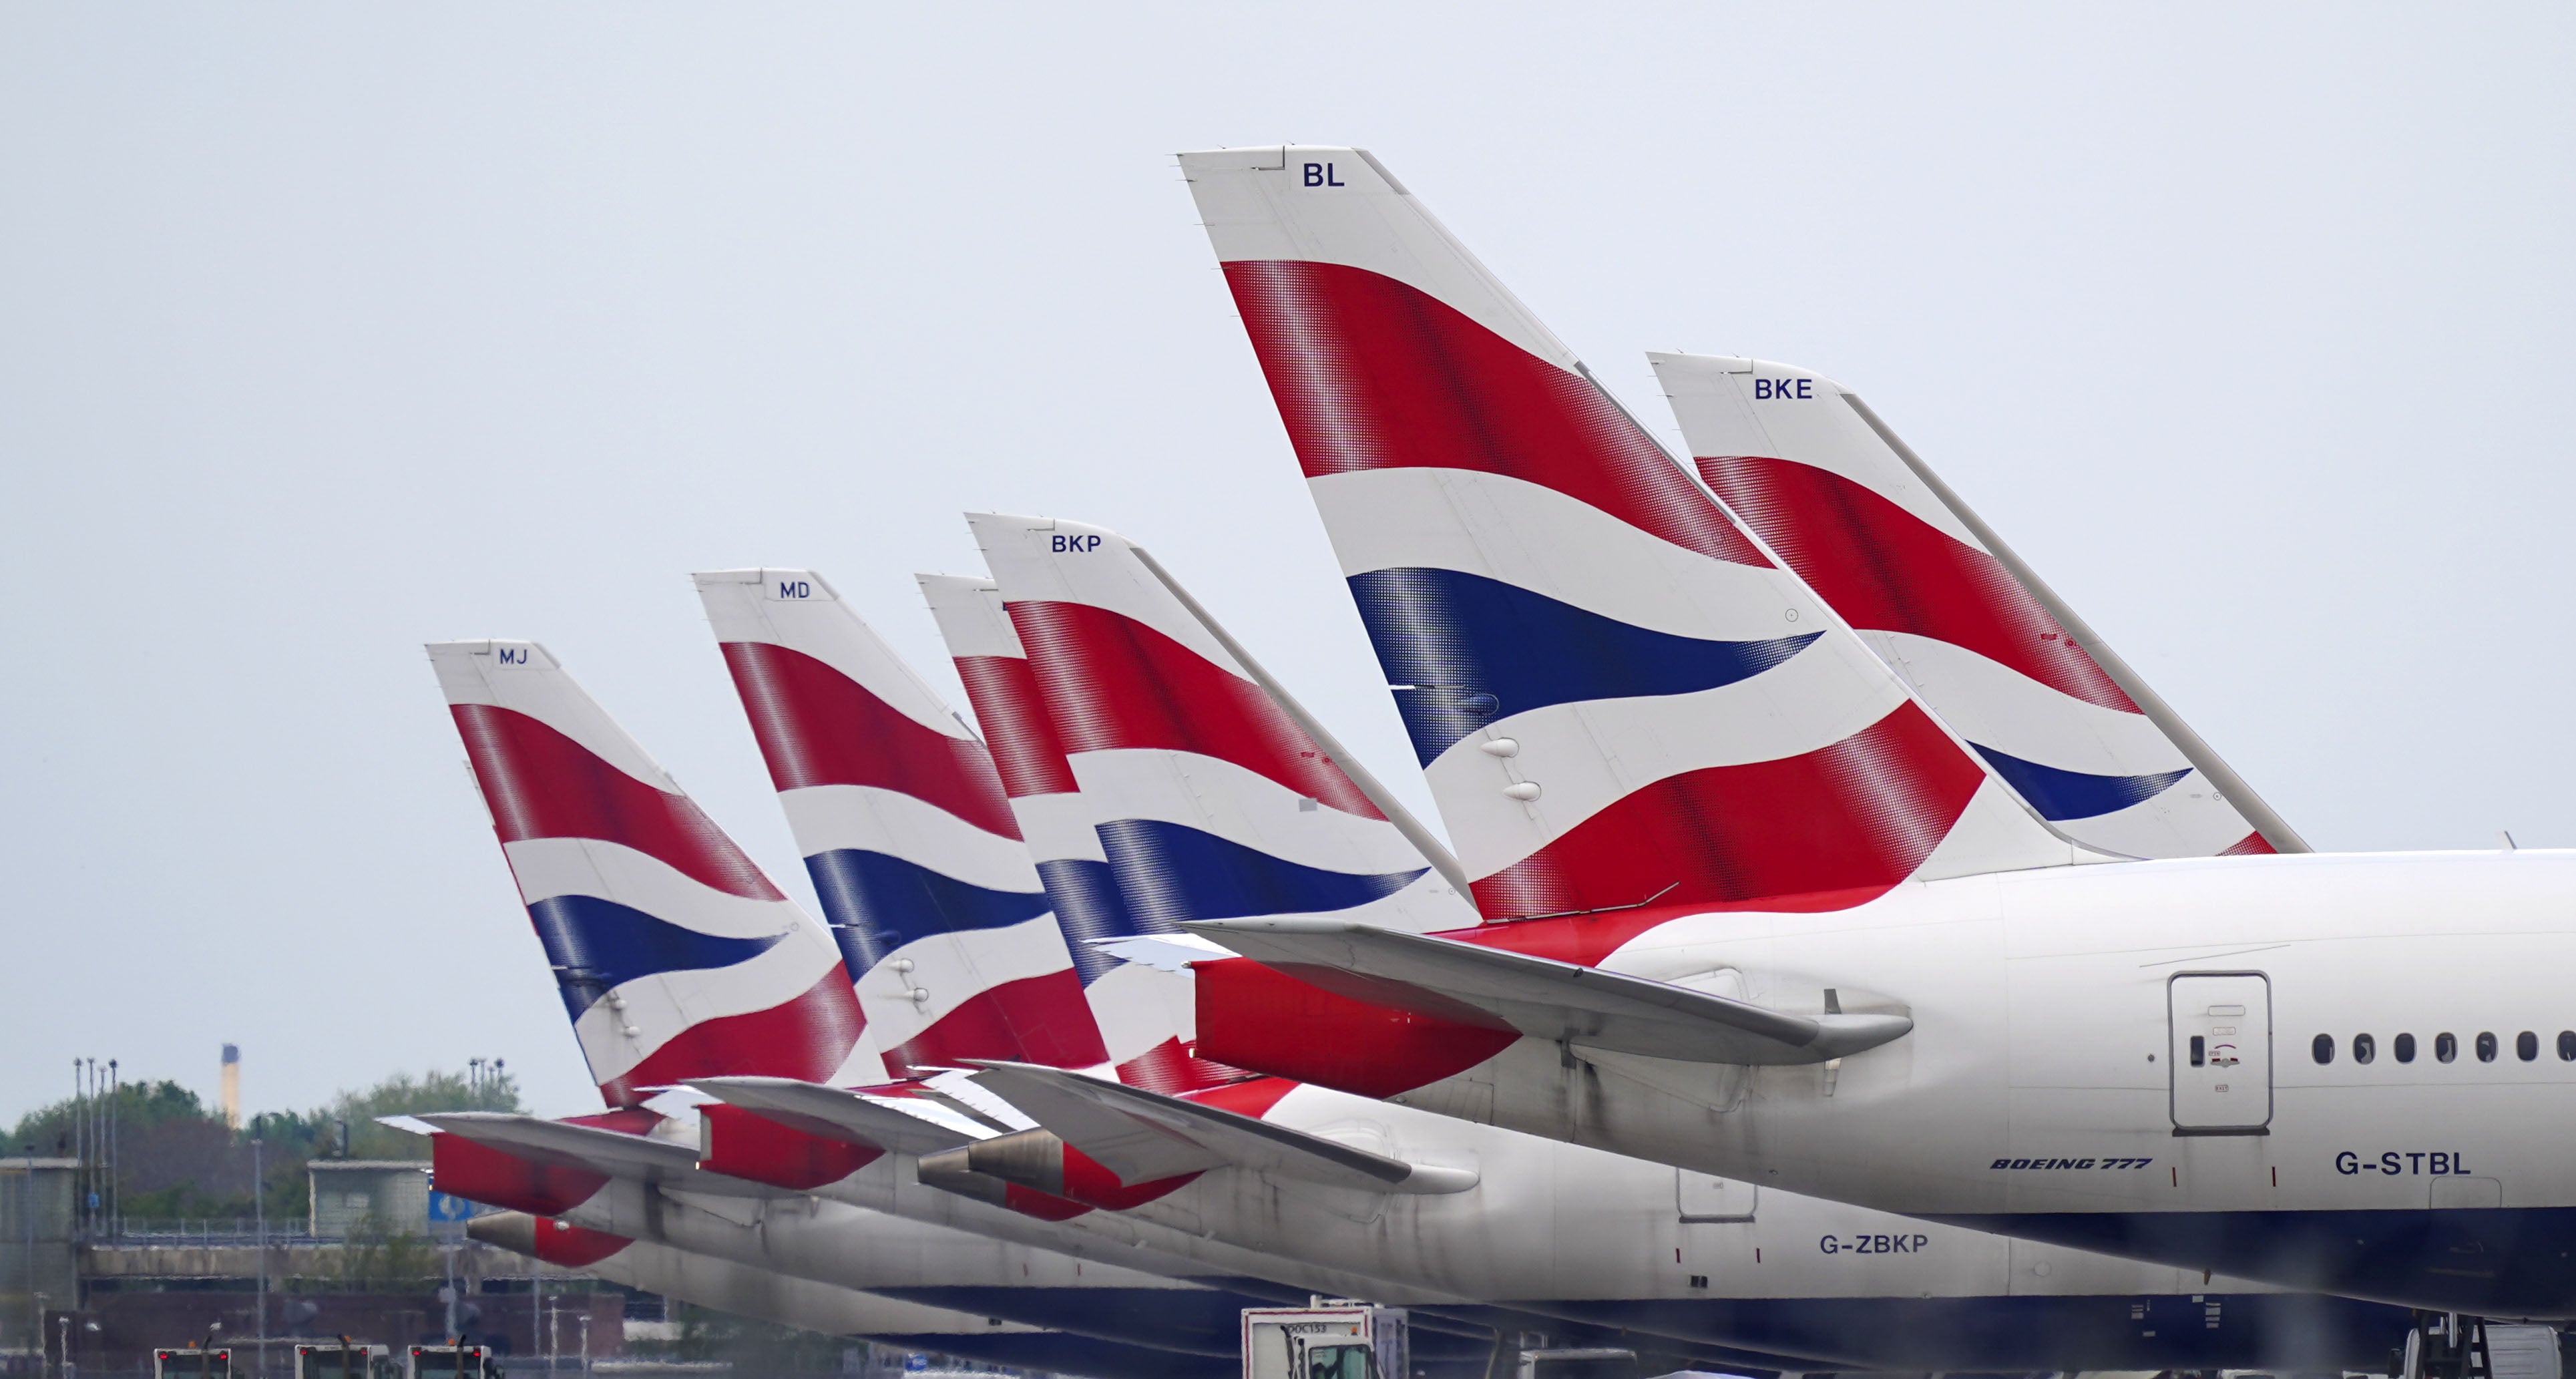 British Airways is to cancel hundreds more summer flights as previous schedule cuts aimed at easing disruption proved insufficient (Steve Parsons/PA)